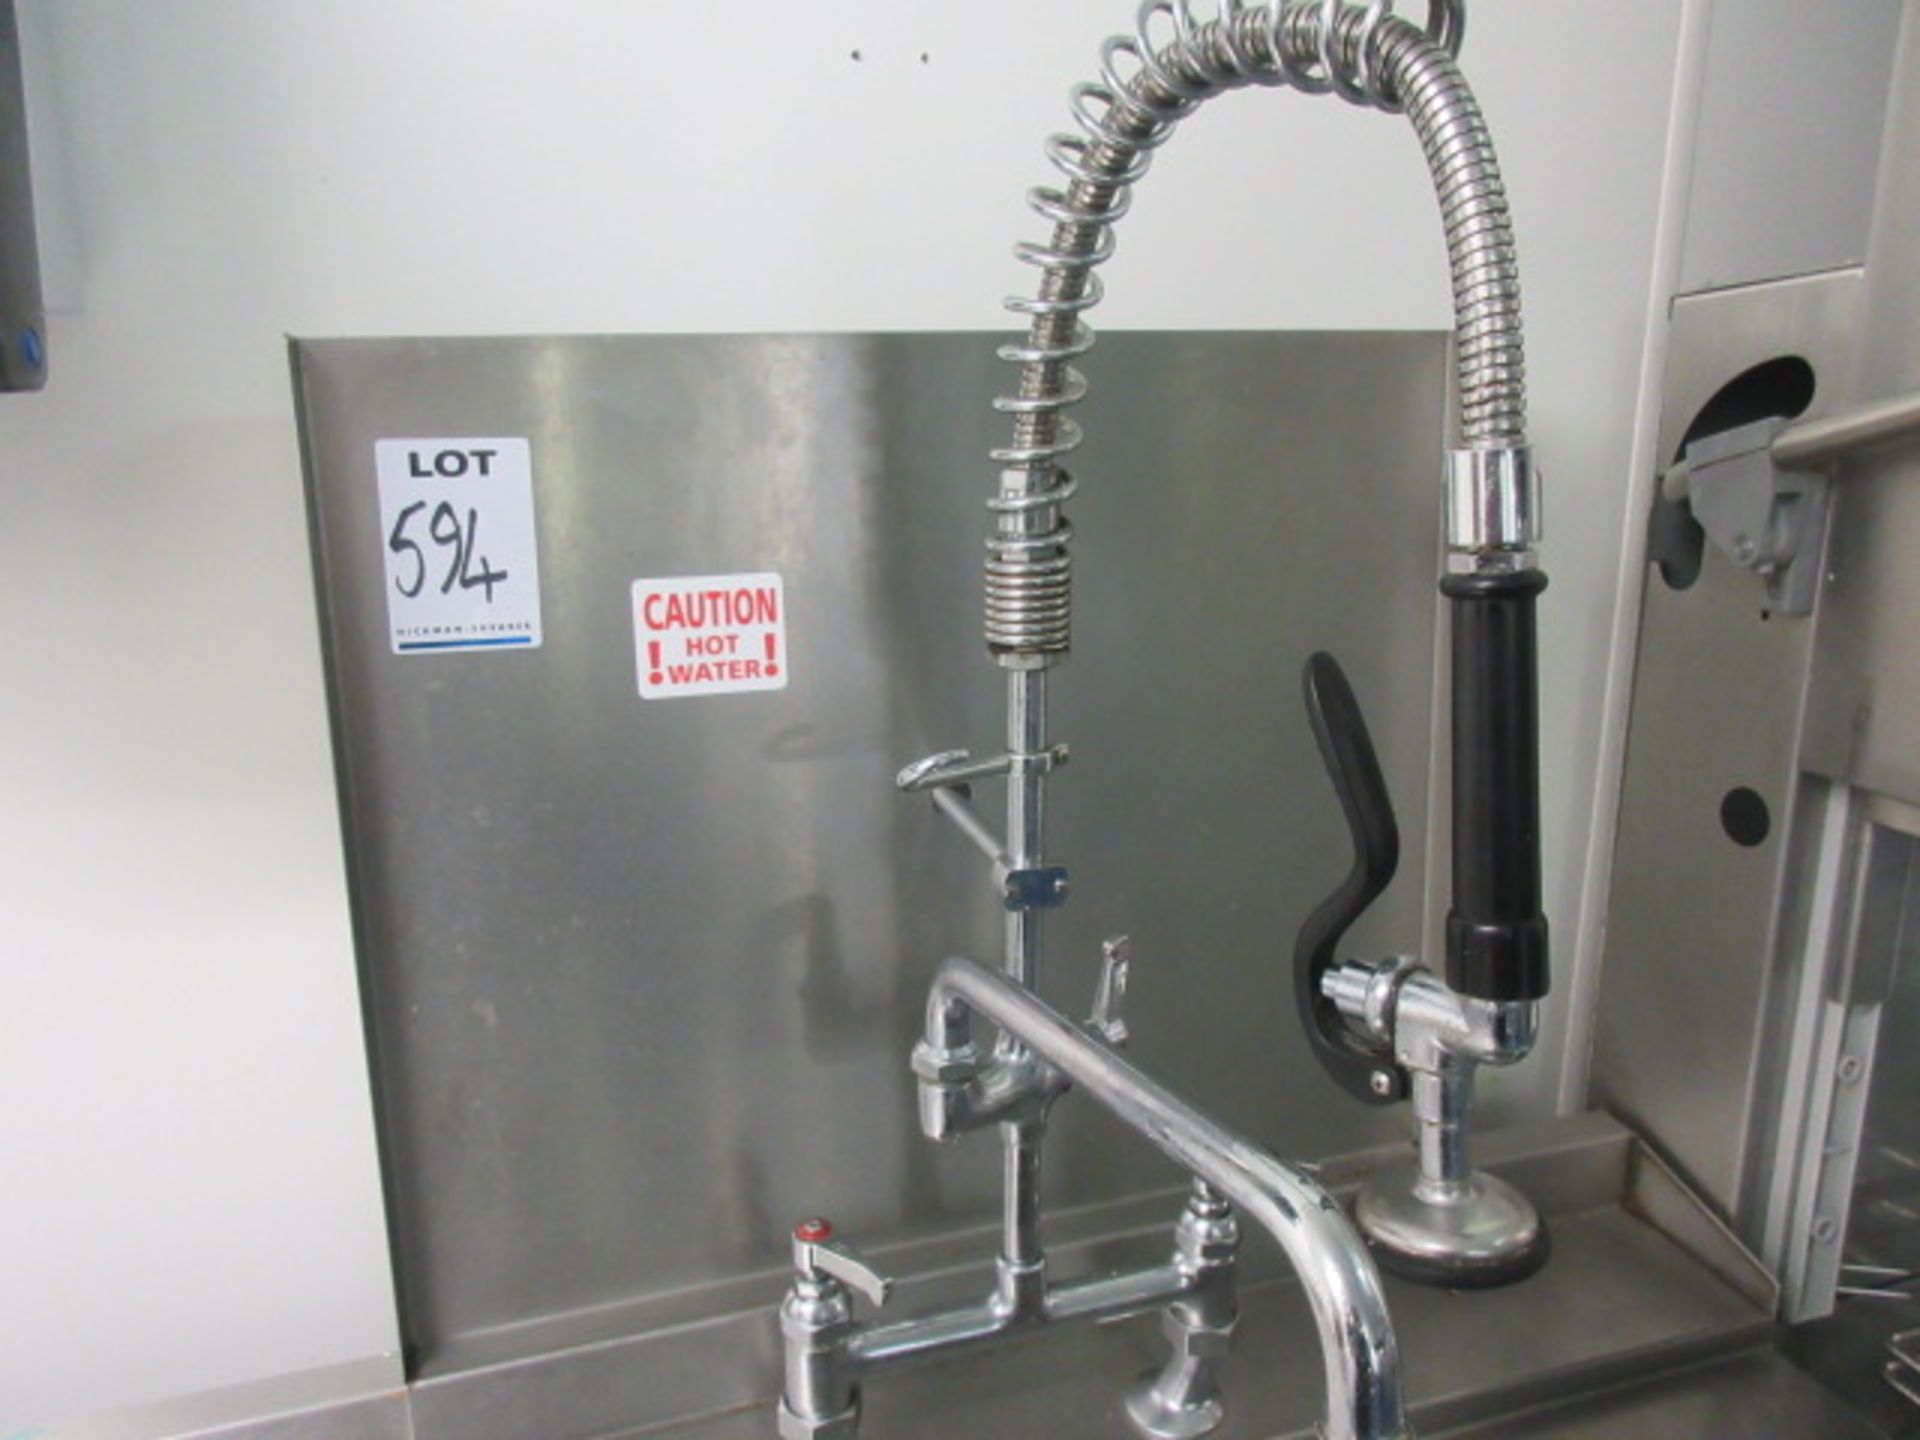 Canteen Wash Down Sink and Waste Disposal Unit Holehouse Road. Gallery canteen. - Image 4 of 4